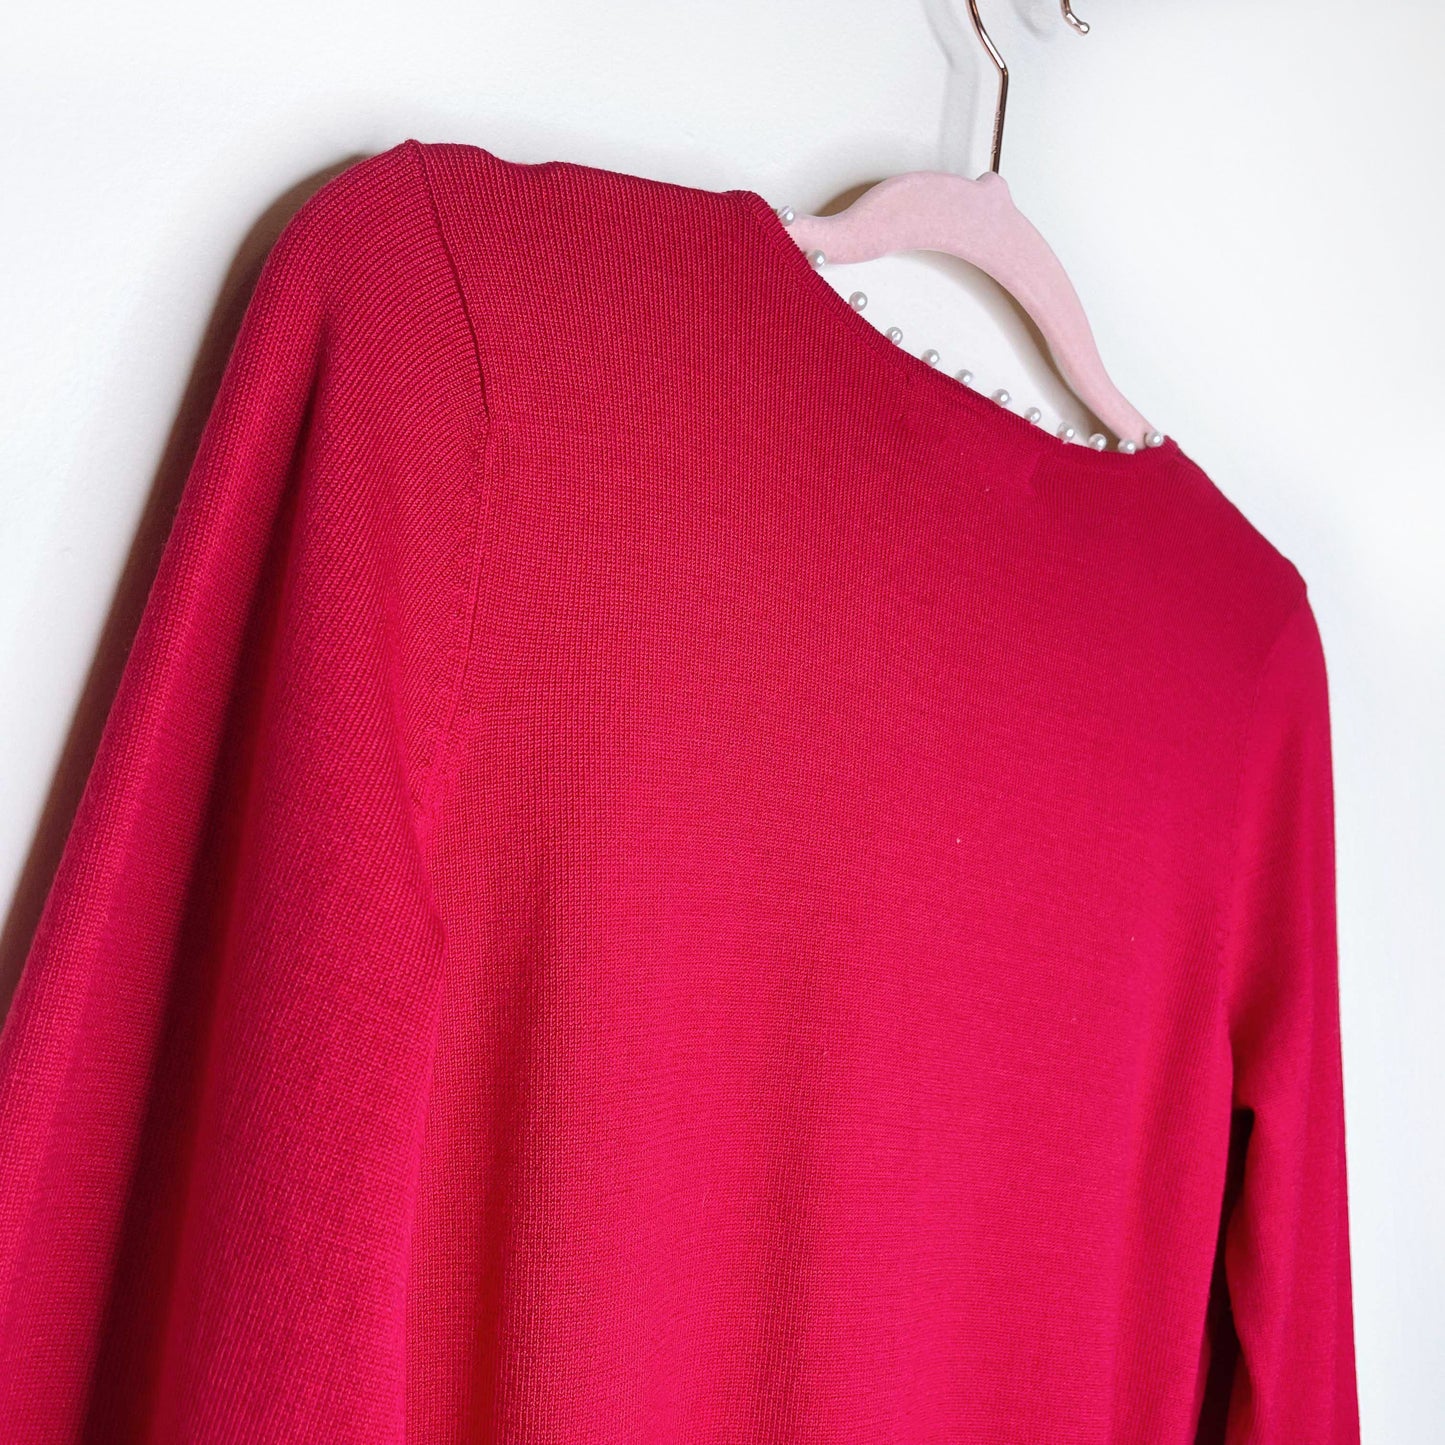 vintage betsey johnson red silk cardigan with pearl trim - size small